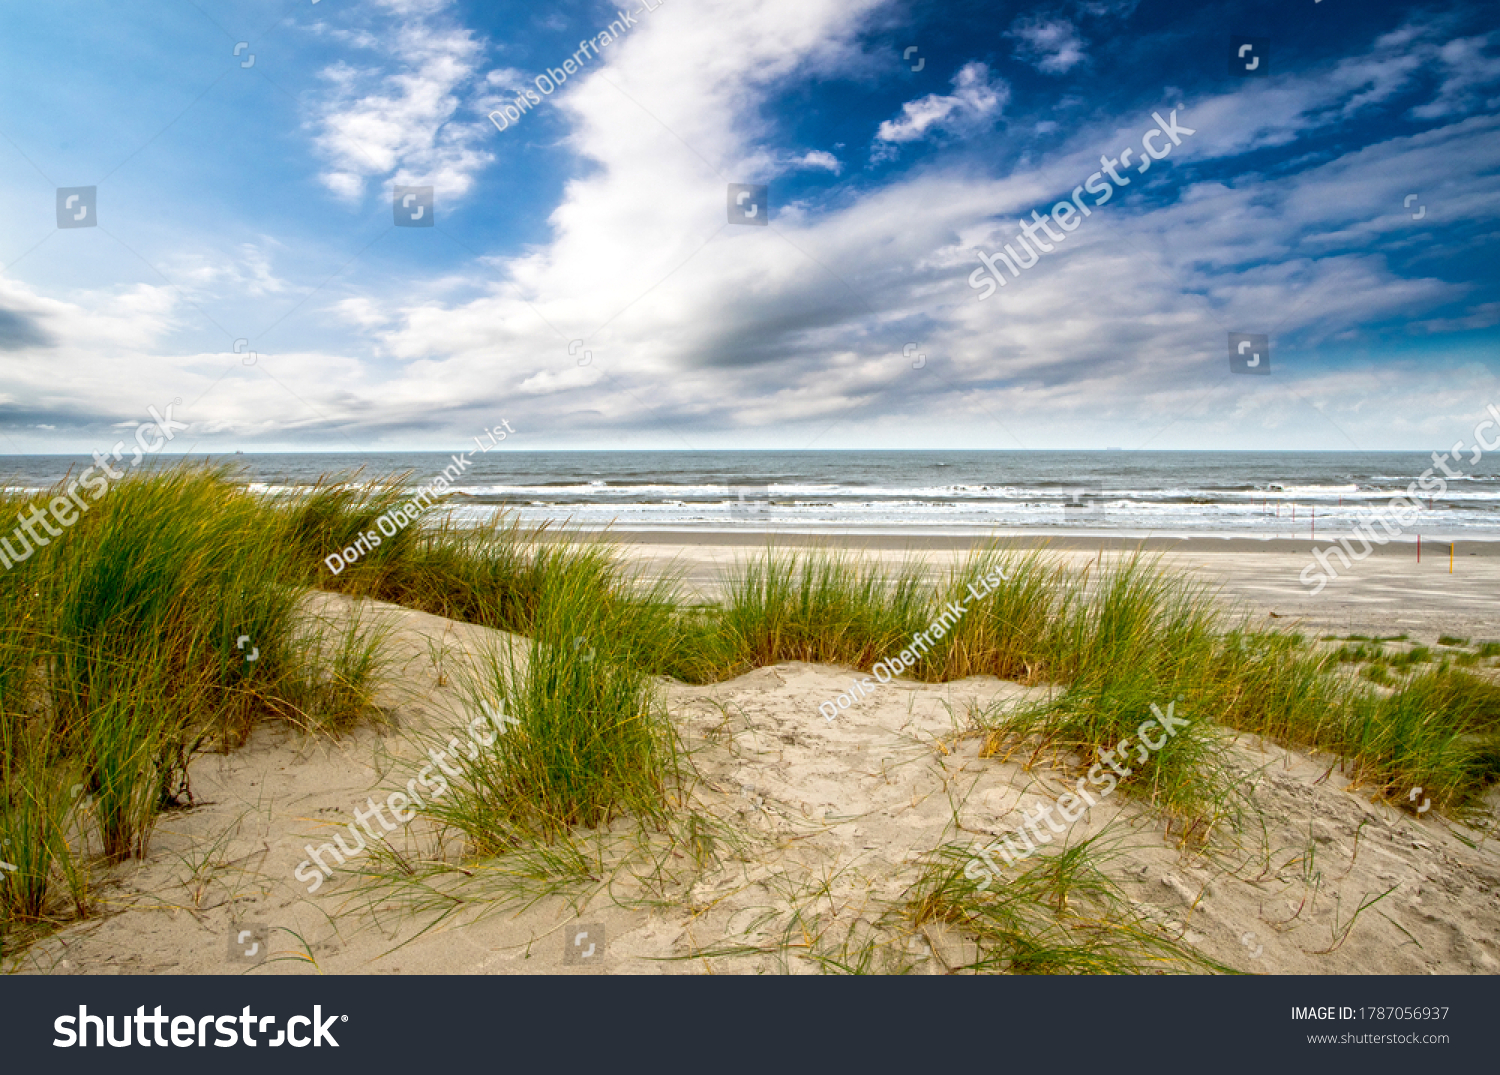 Wonderful dune beach on the North Sea island Langeoog in Germany with sand, dune grass, blue sky and clouds on a beautiful summer day; very healthy and quiet environment in Europe #1787056937